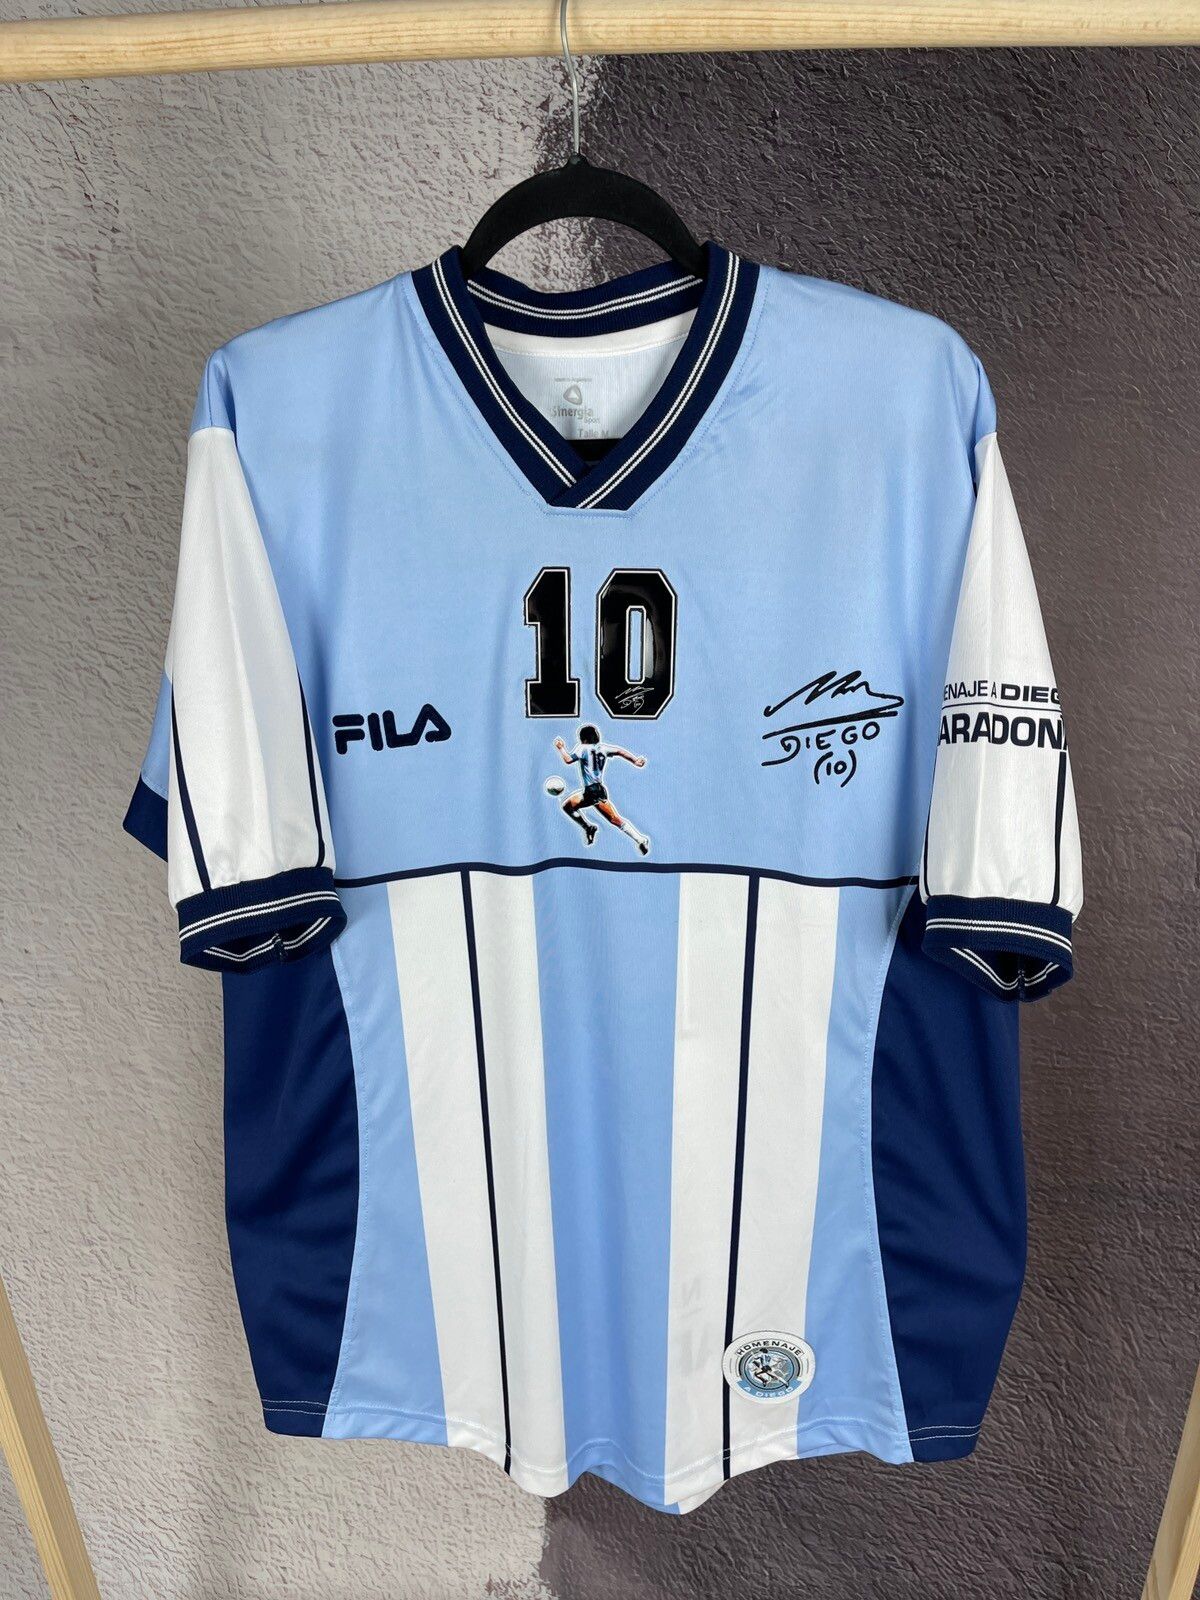 Soccer Jersey Limited Edition Jersey Argentina Maradona football soccer Size US M / EU 48-50 / 2 - 2 Preview